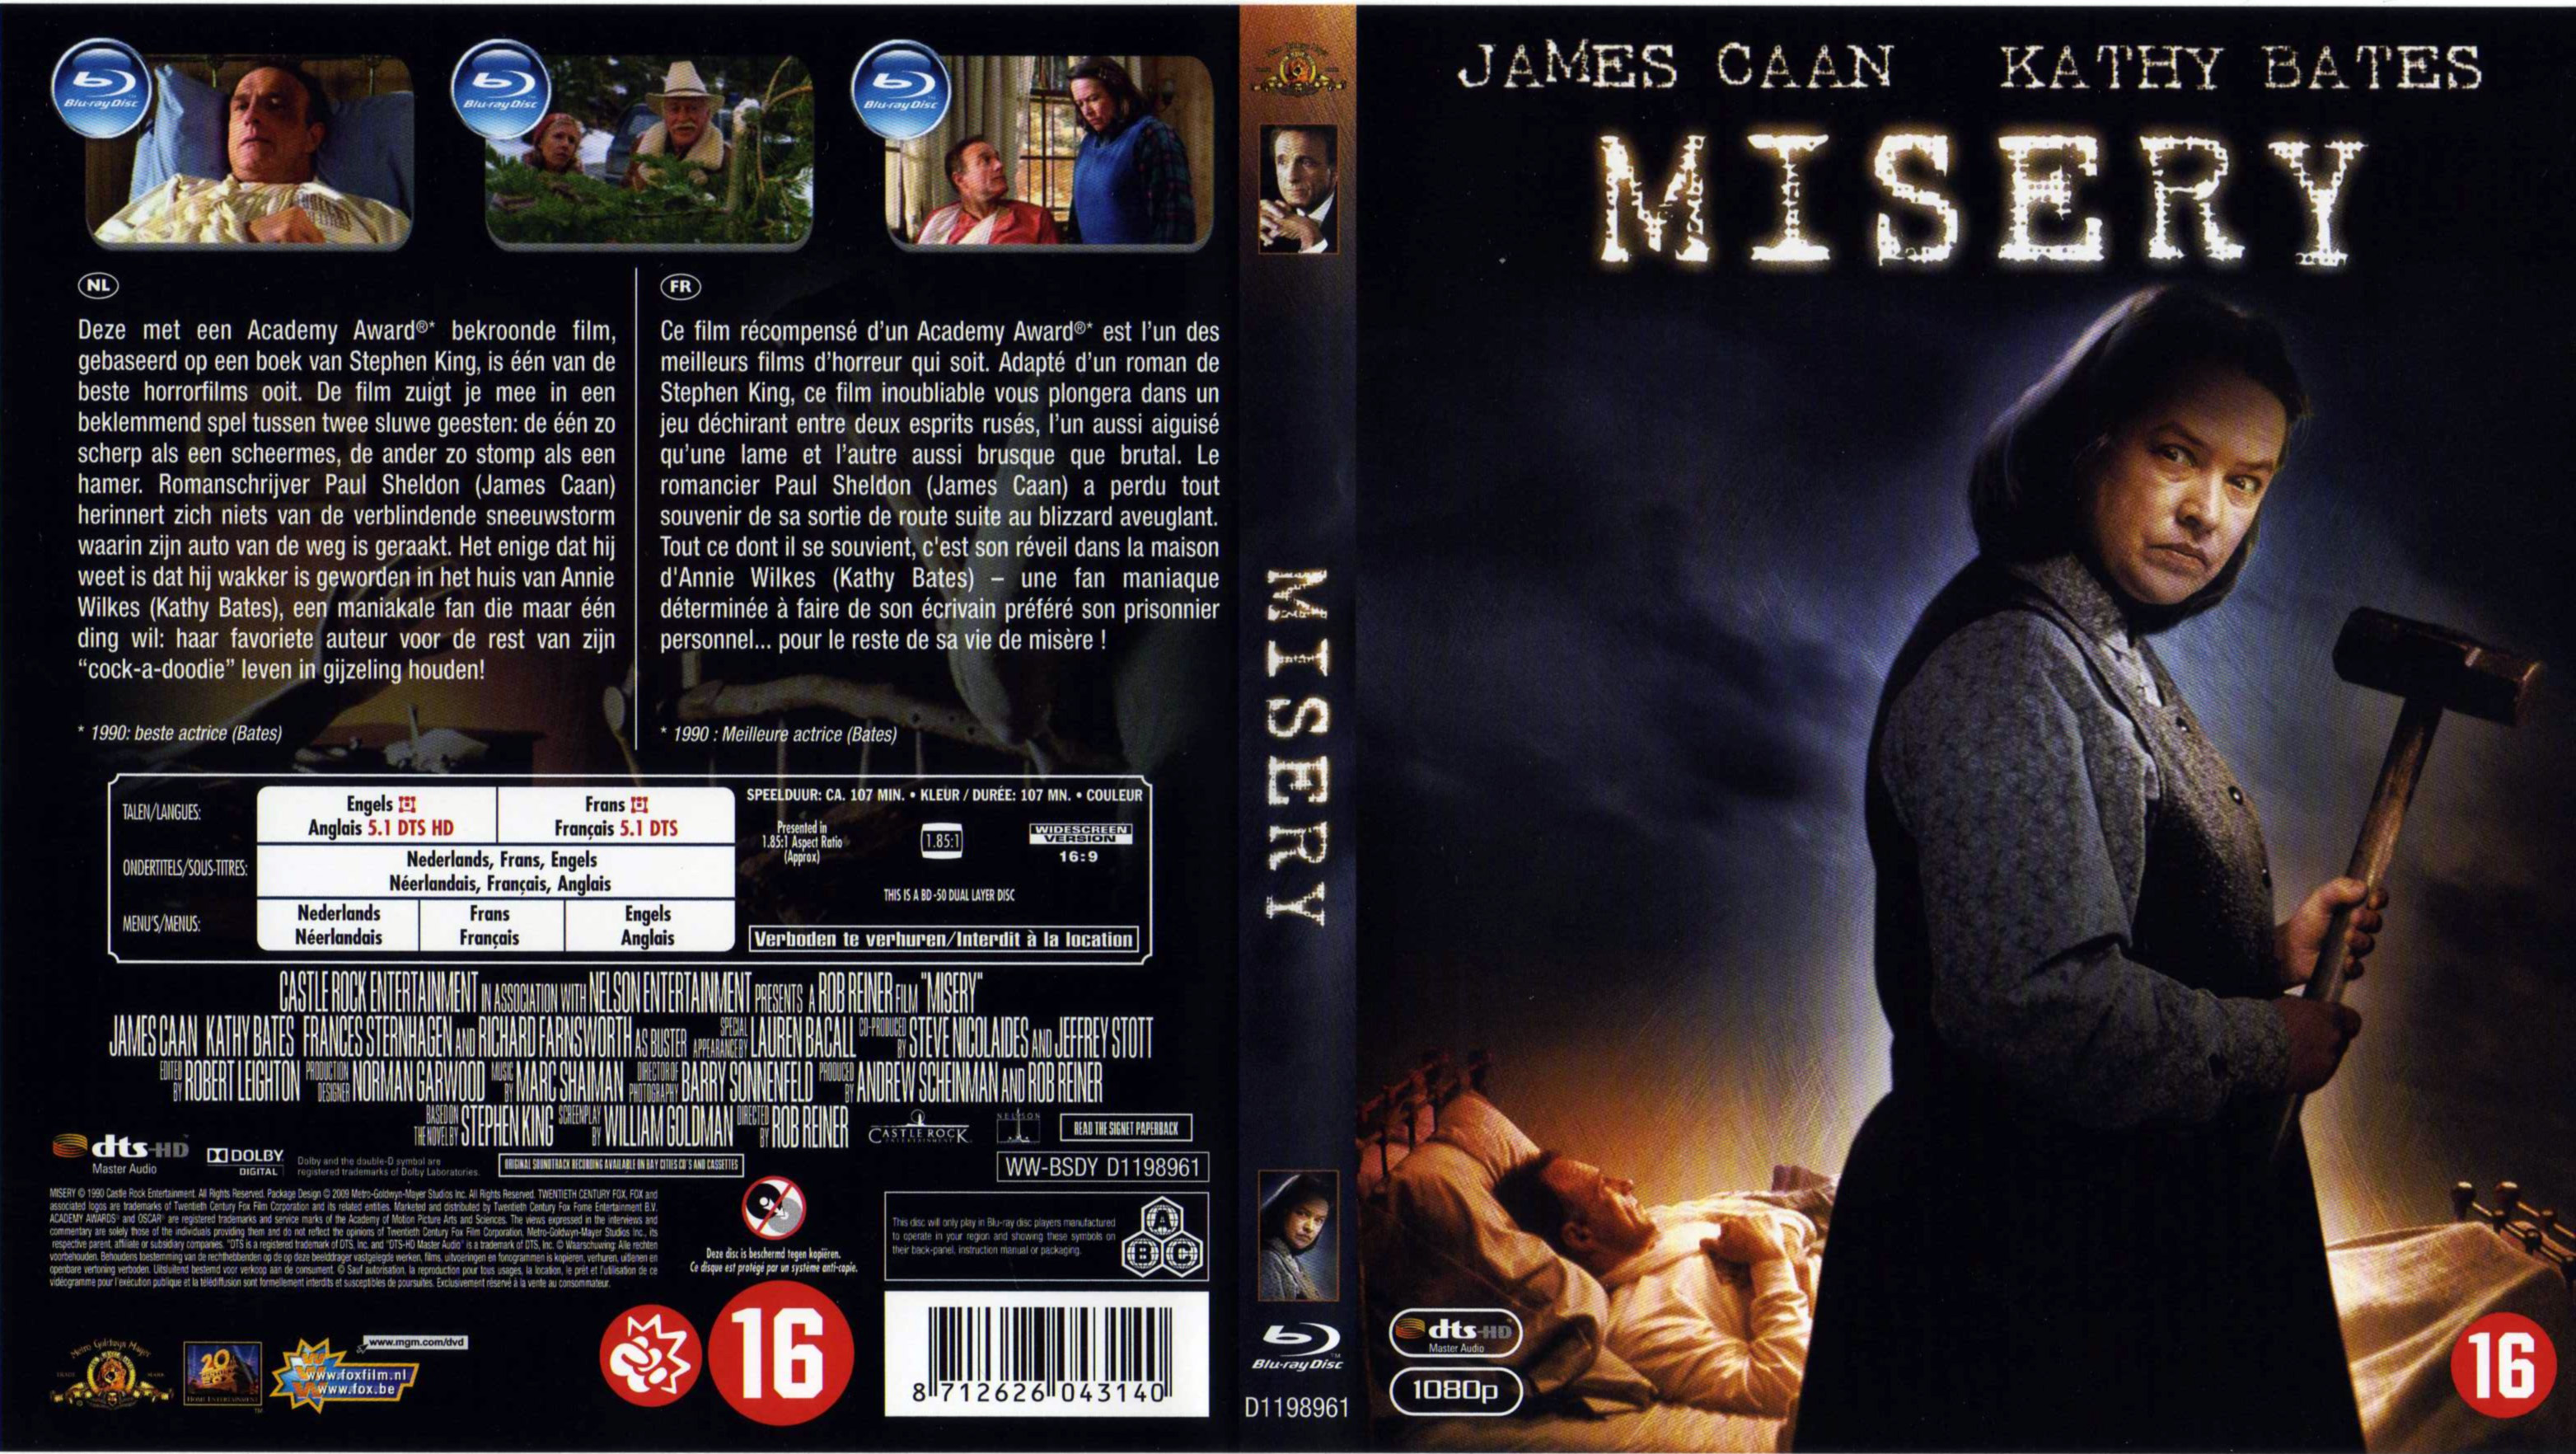 Jaquette DVD Misery (BLU-RAY)